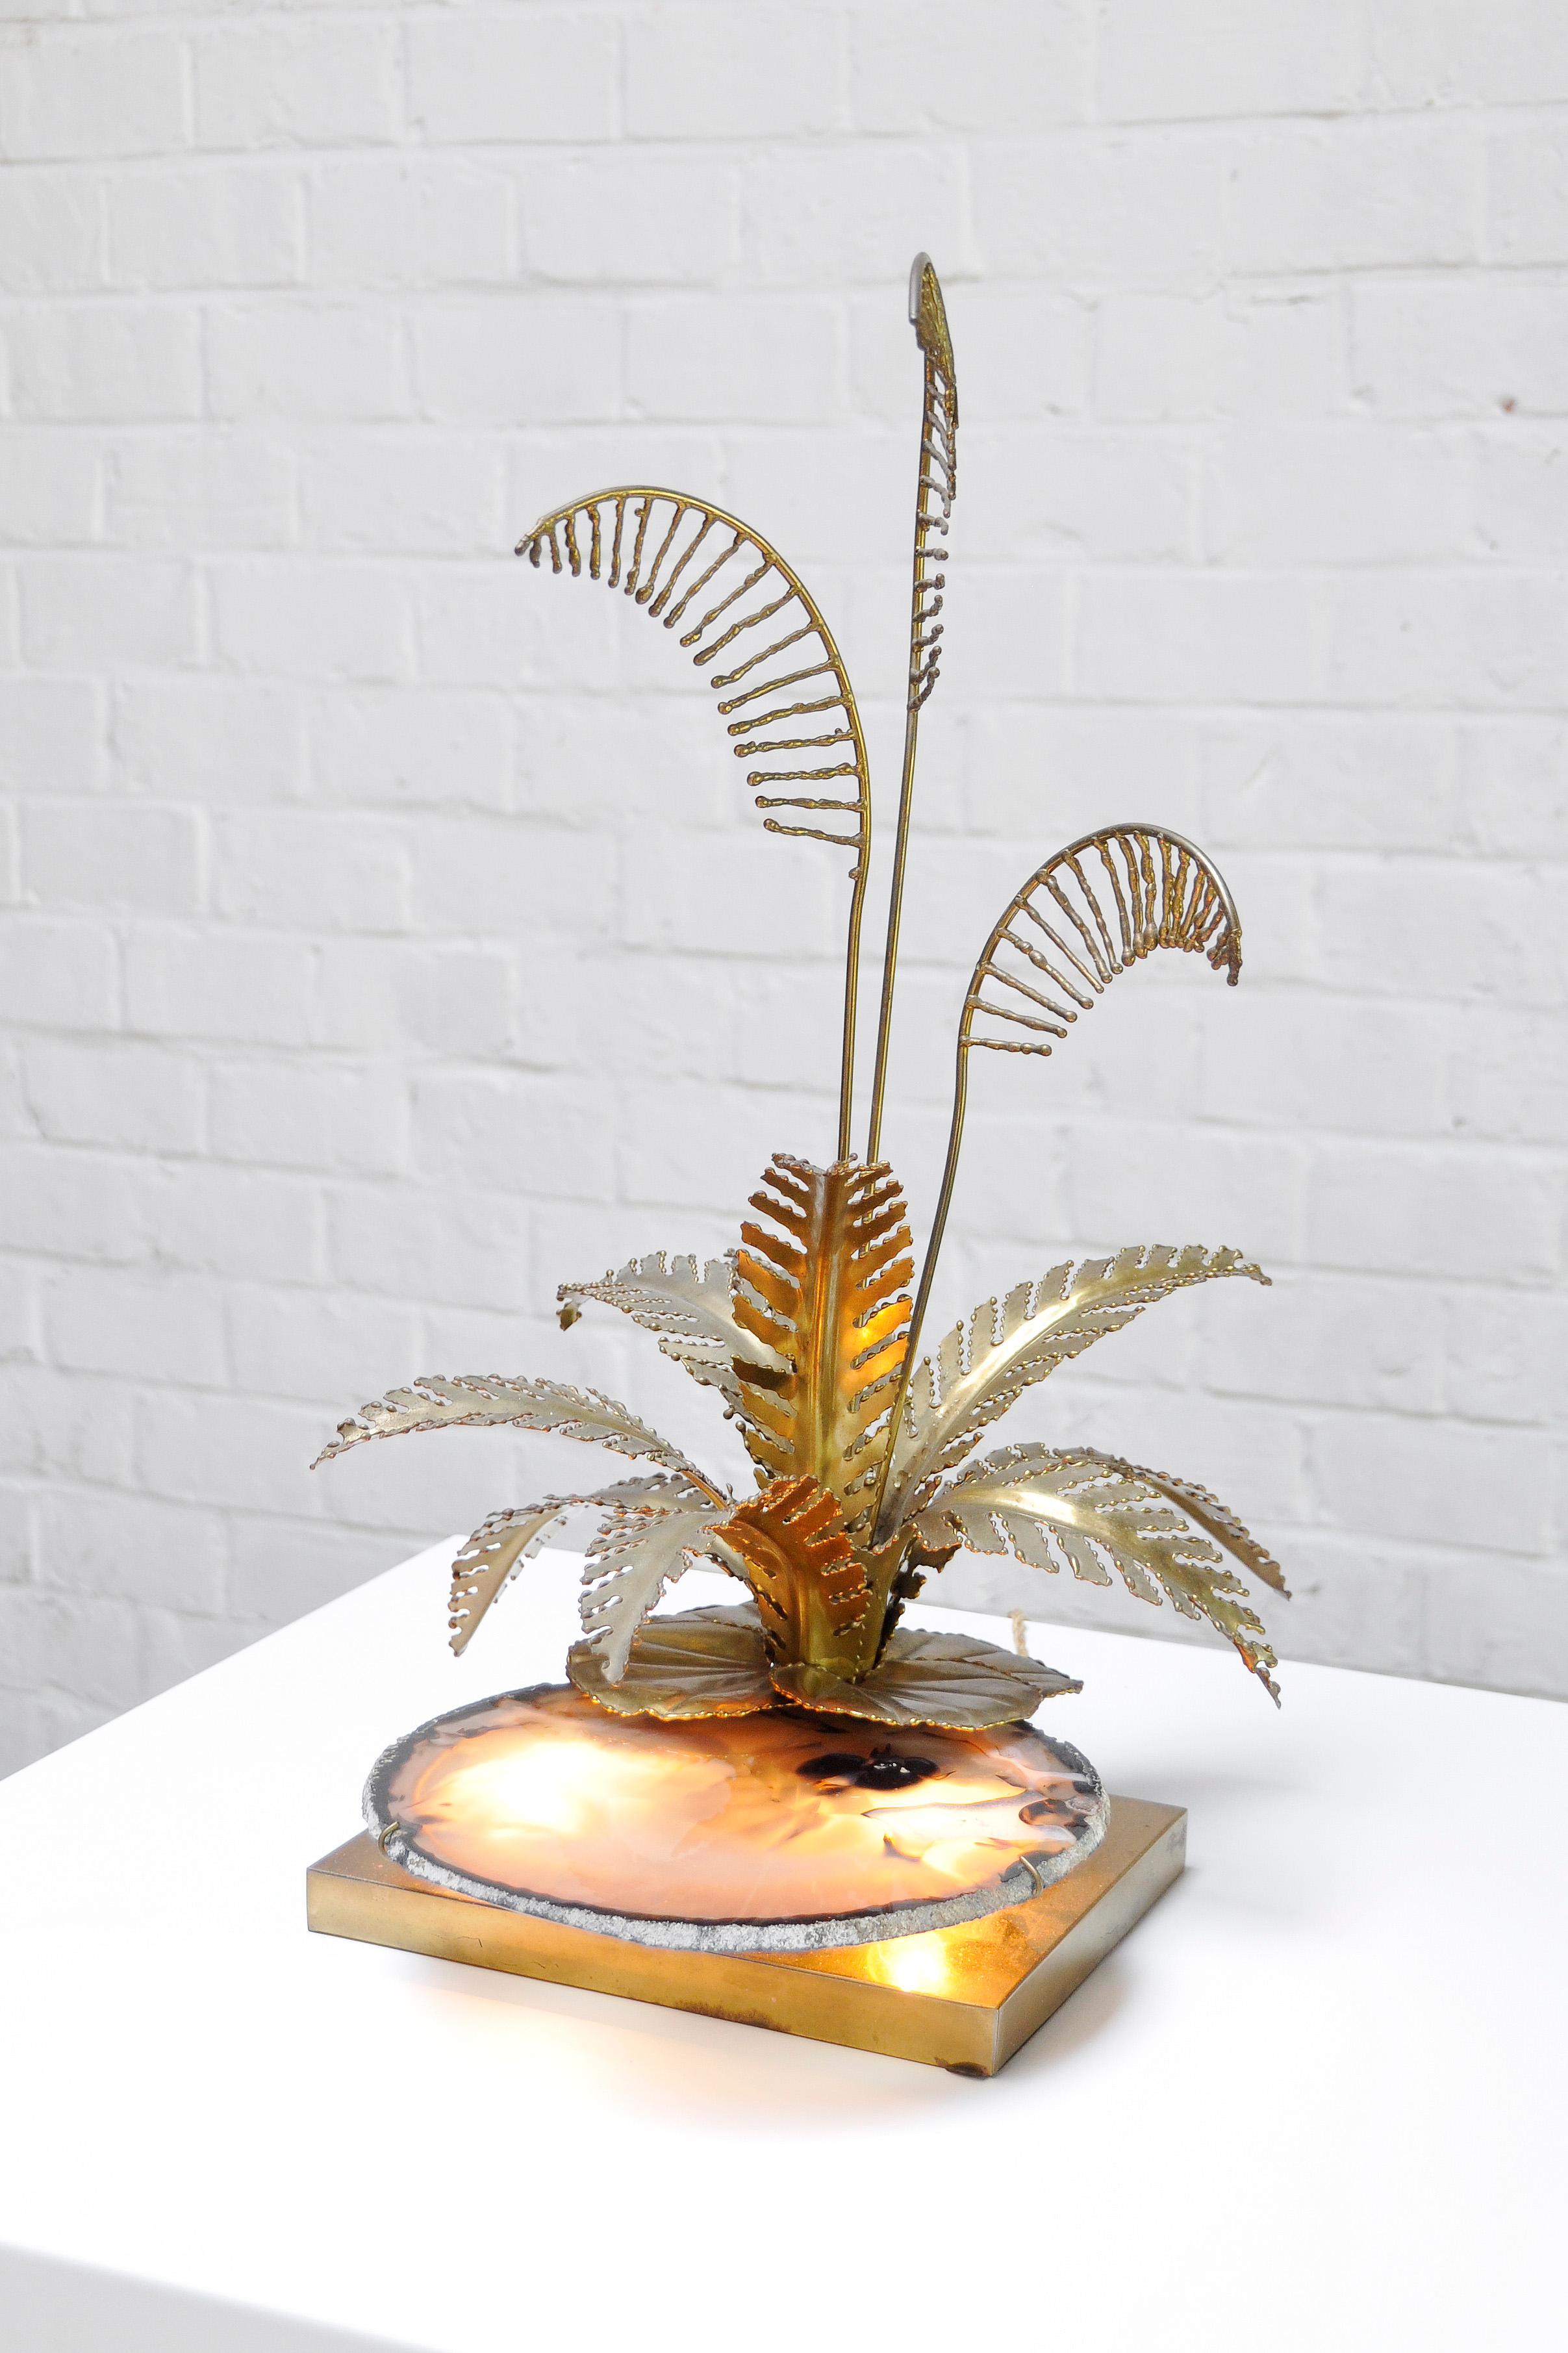 An unusual and impressive sculptural table lamp made by Henri Fernandez in his workshop in the 1970s. The lamp features the organic forms of stalks and leaves made out of warm gilded brass. The centrepiece of this lamp is the flat agate stone which